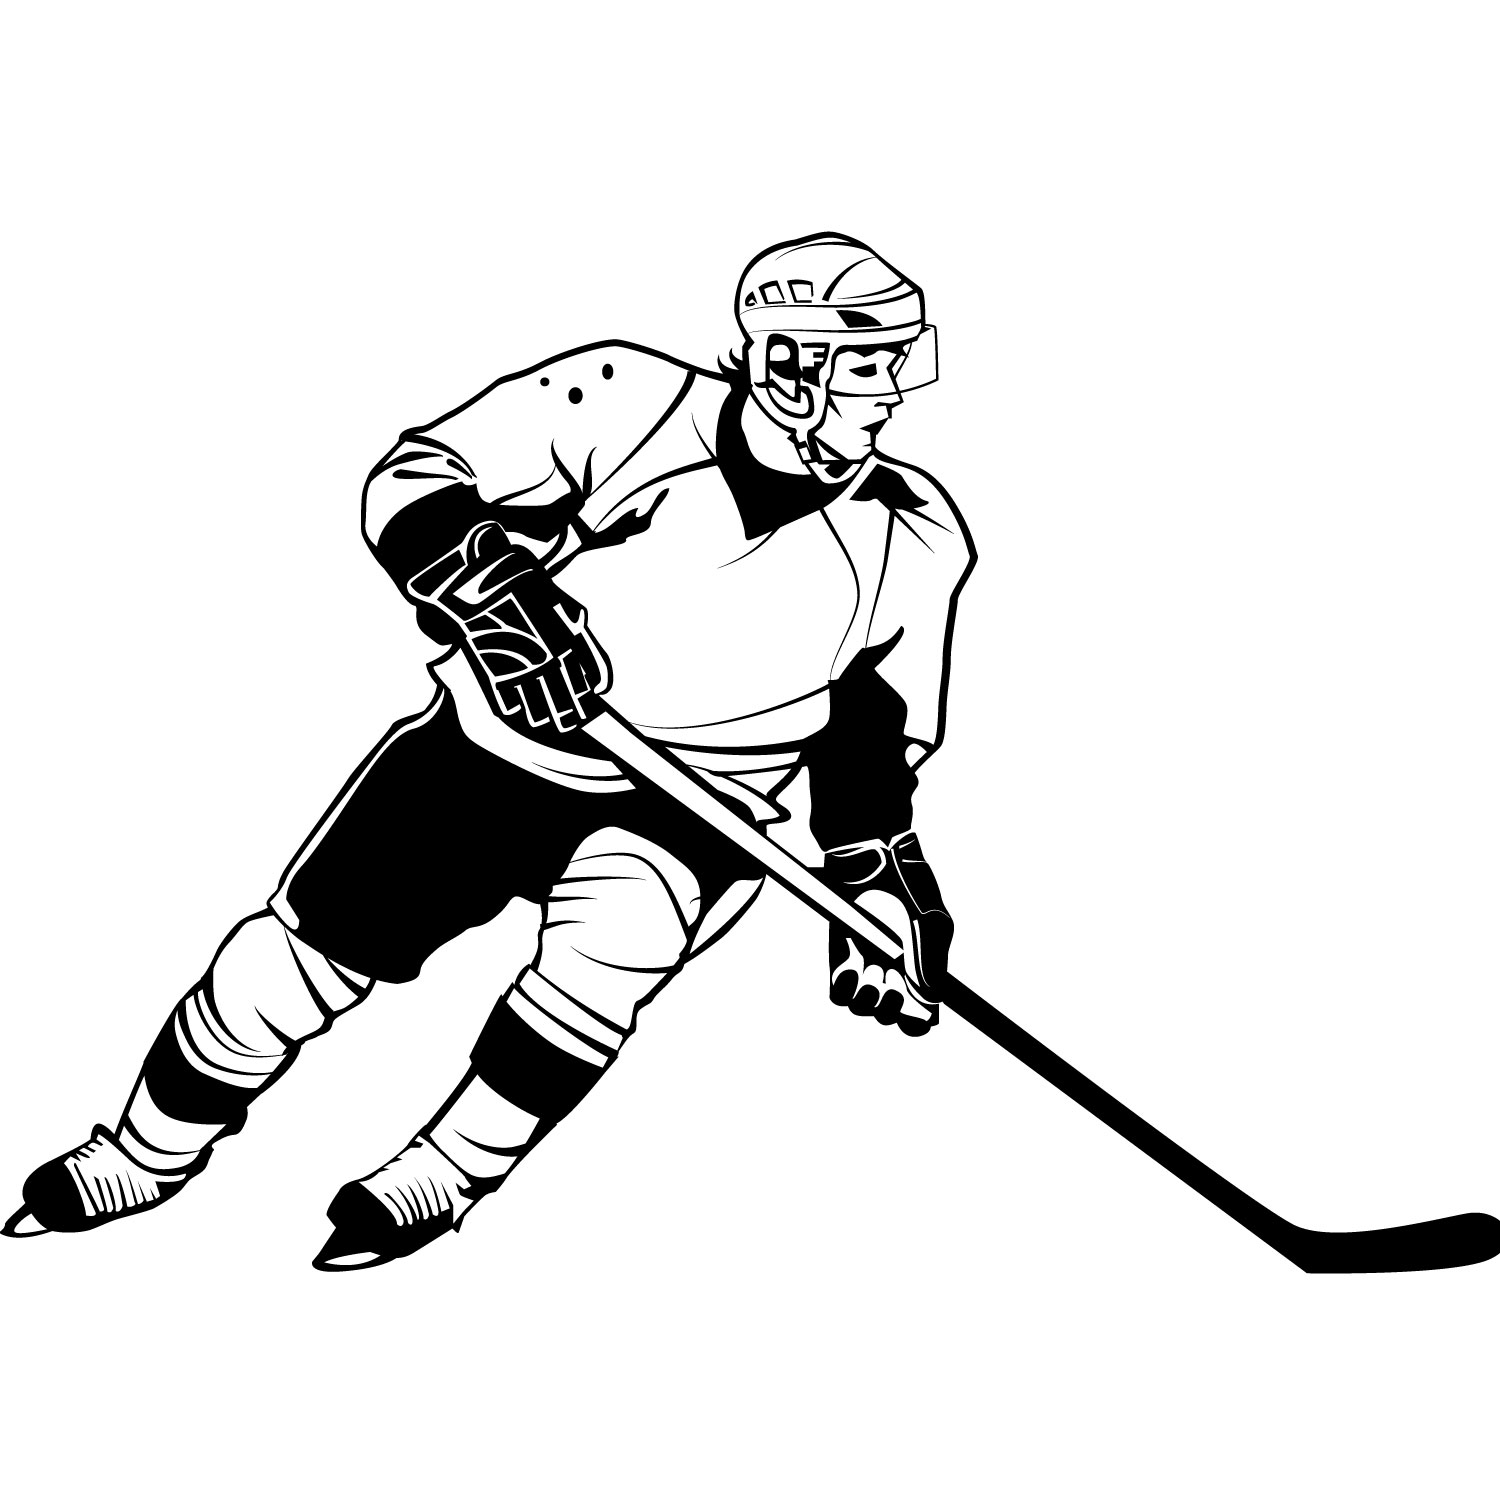 Hockey clip art images free free clipart images